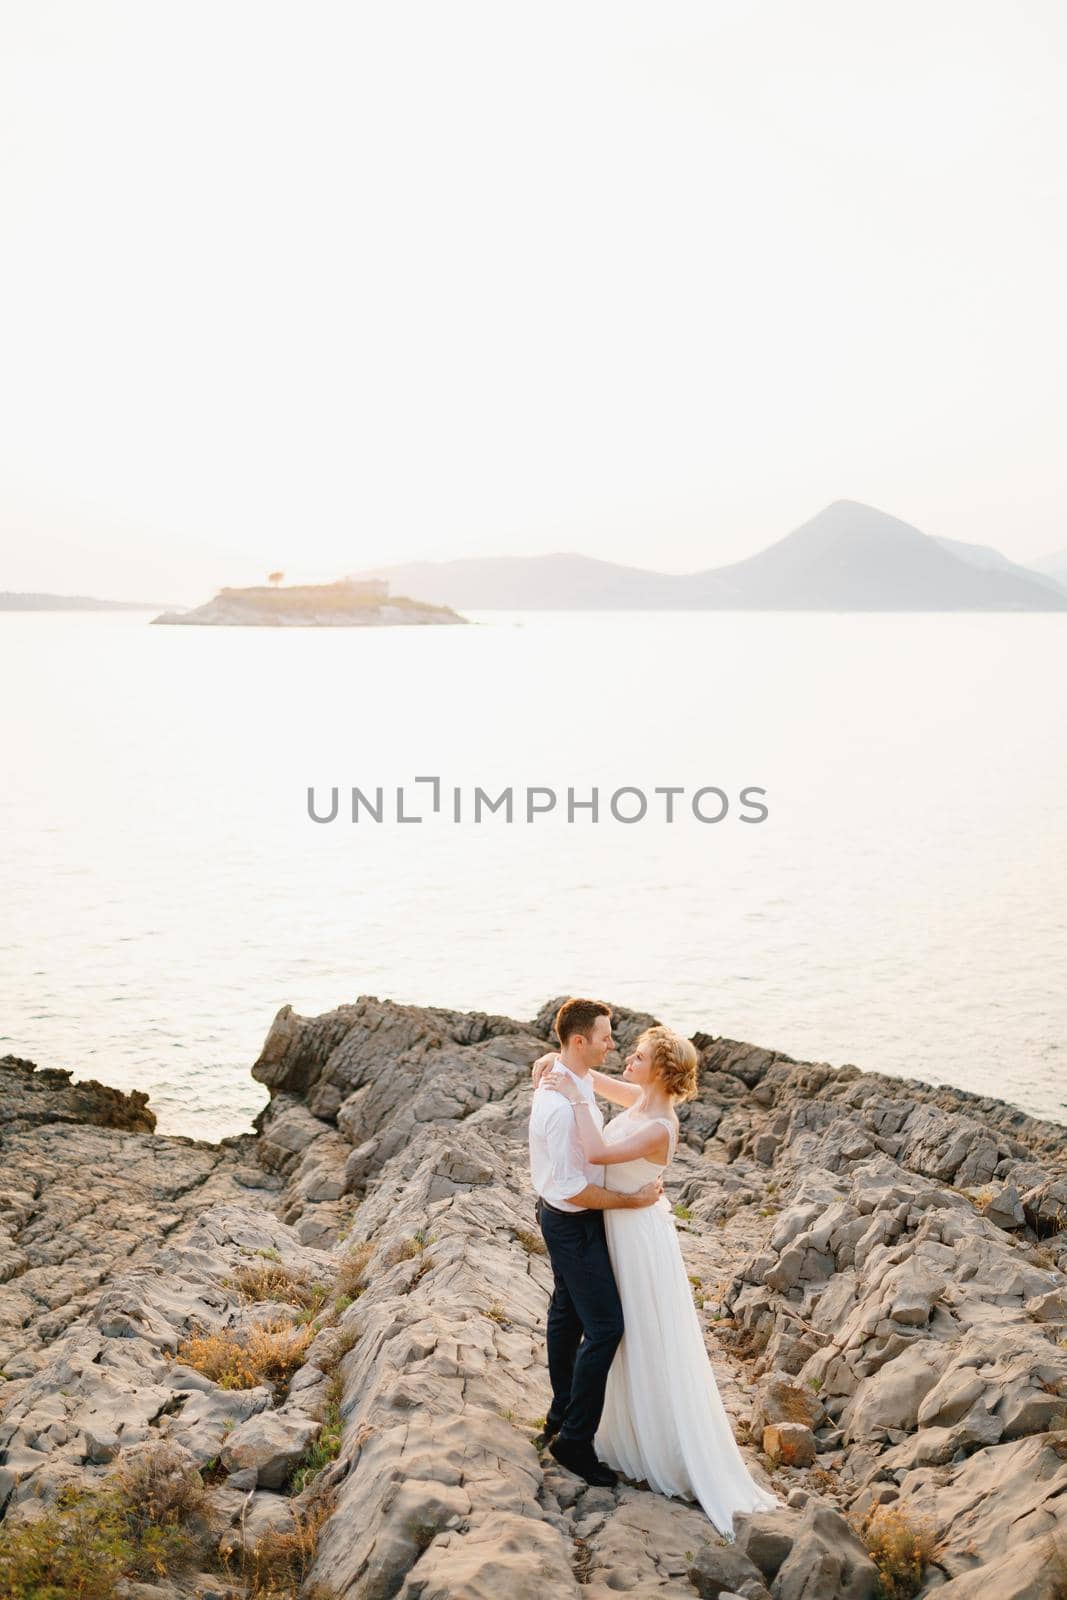 The bride and groom hug on the rocks by the sea against the backdrop of the mountains and the island of Mamula . High quality photo